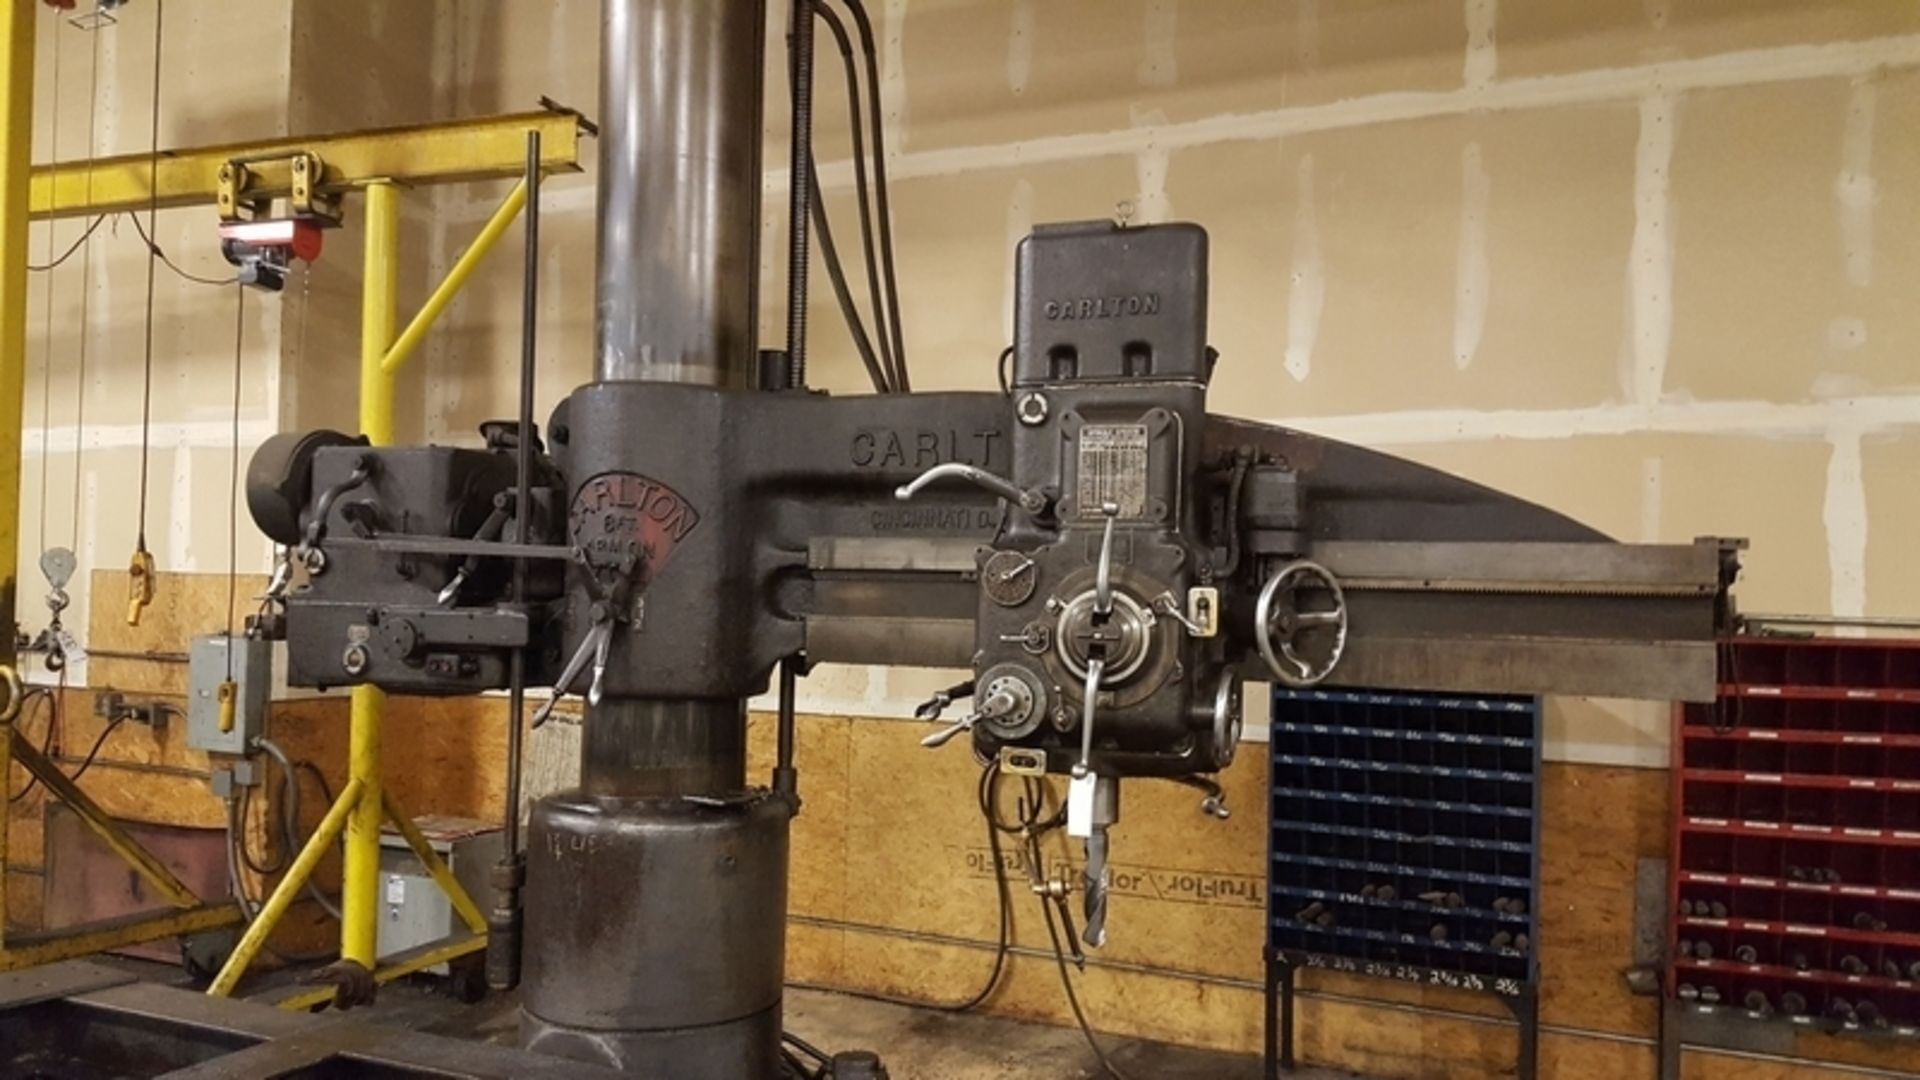 CARLTON RADIAL ARM DRILL, 15-HP DRIVE MOTOR, VARIABLE SPEED FEED RATE, HIGH/LOW GEAR BOX 25-1850,